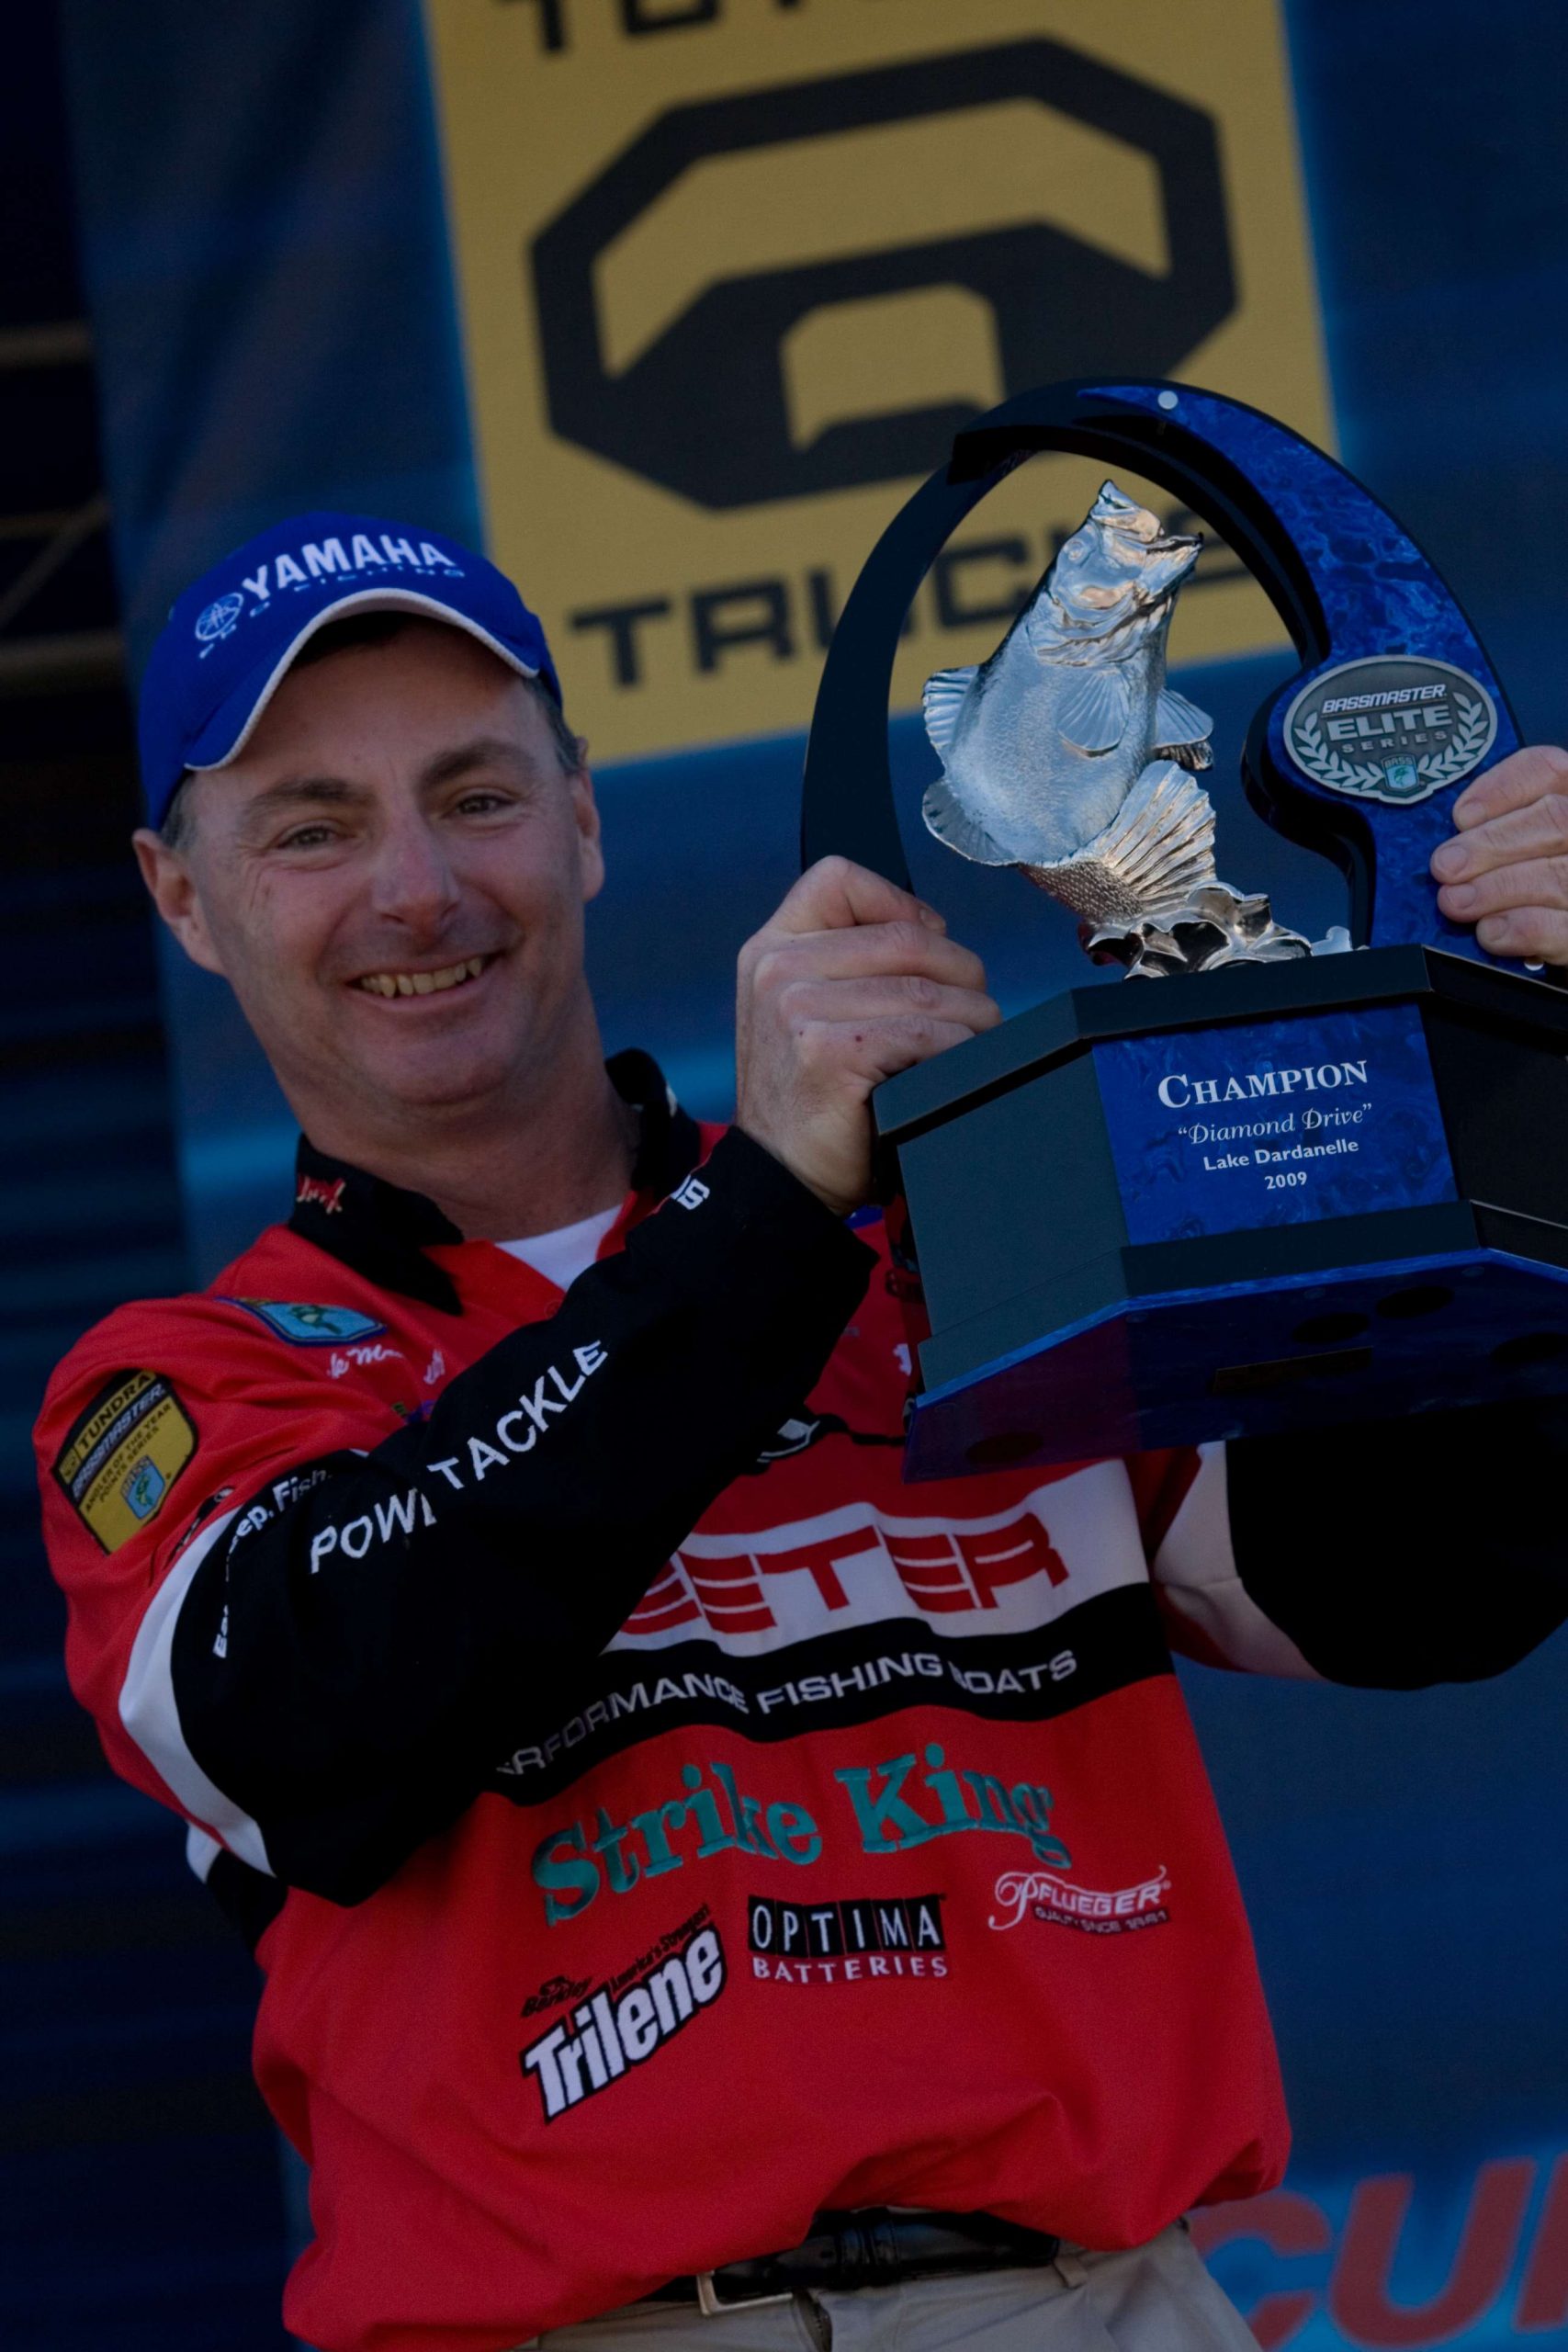 In 2009, Mark Menendez edged out Kevin VanDam to win his first and only Elite Series trophy on Dardanelle. 